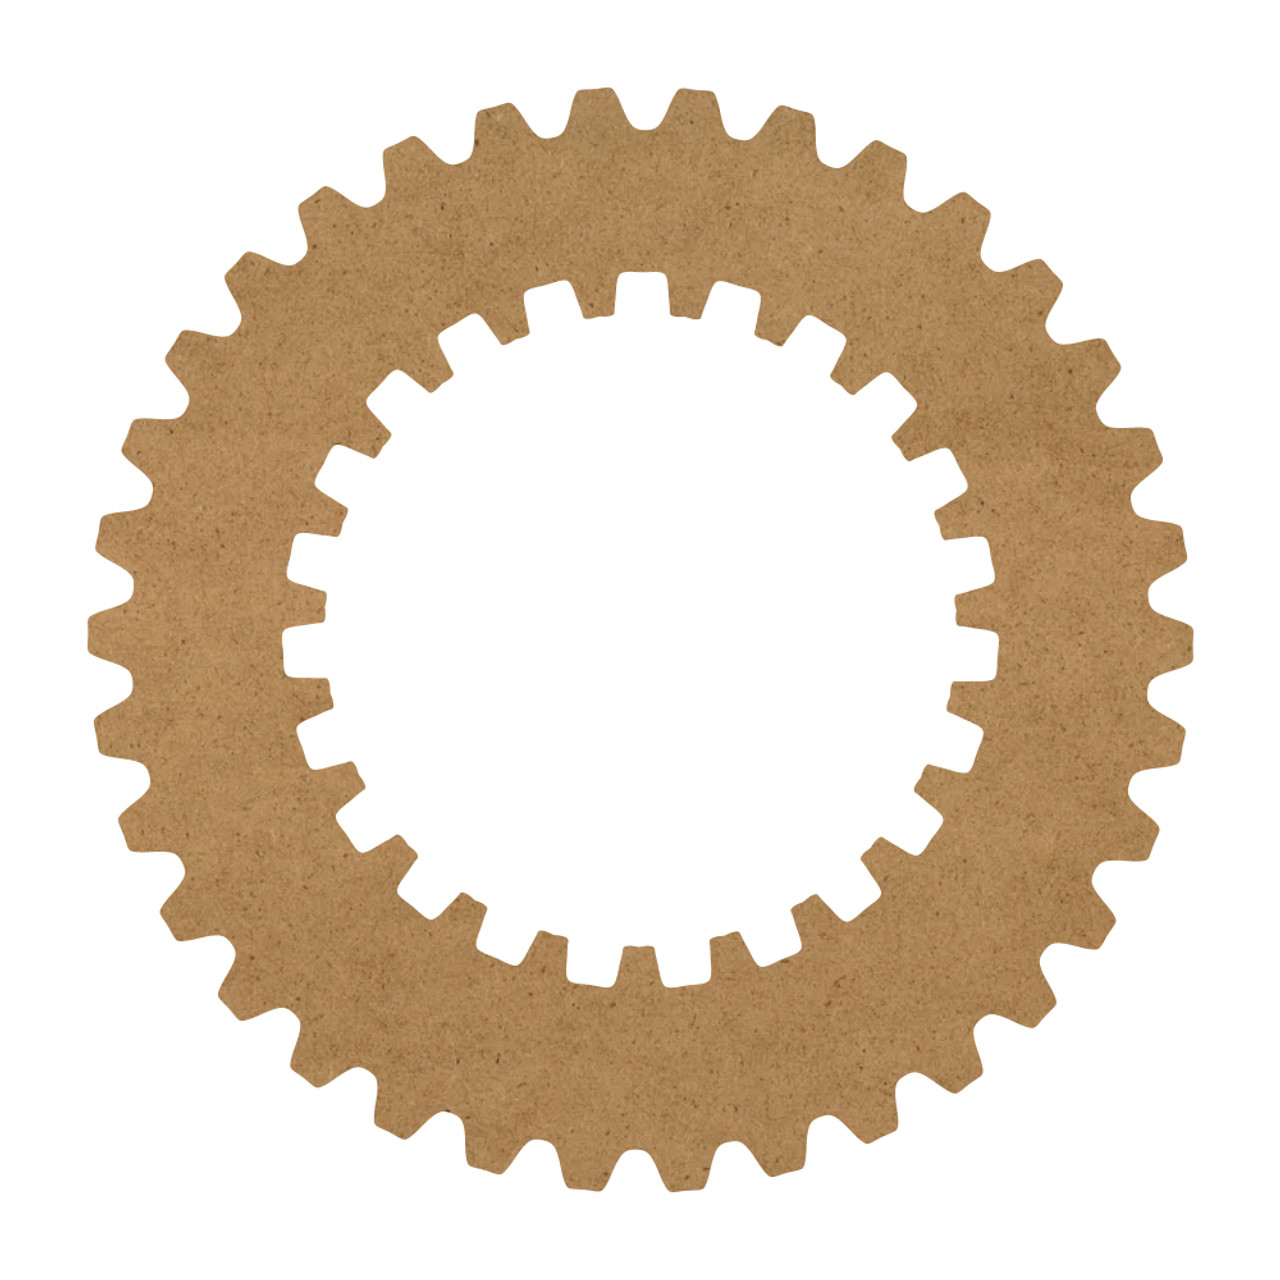 Spur Gear Wood Surface - 18" x 18" - WDSF1413_7